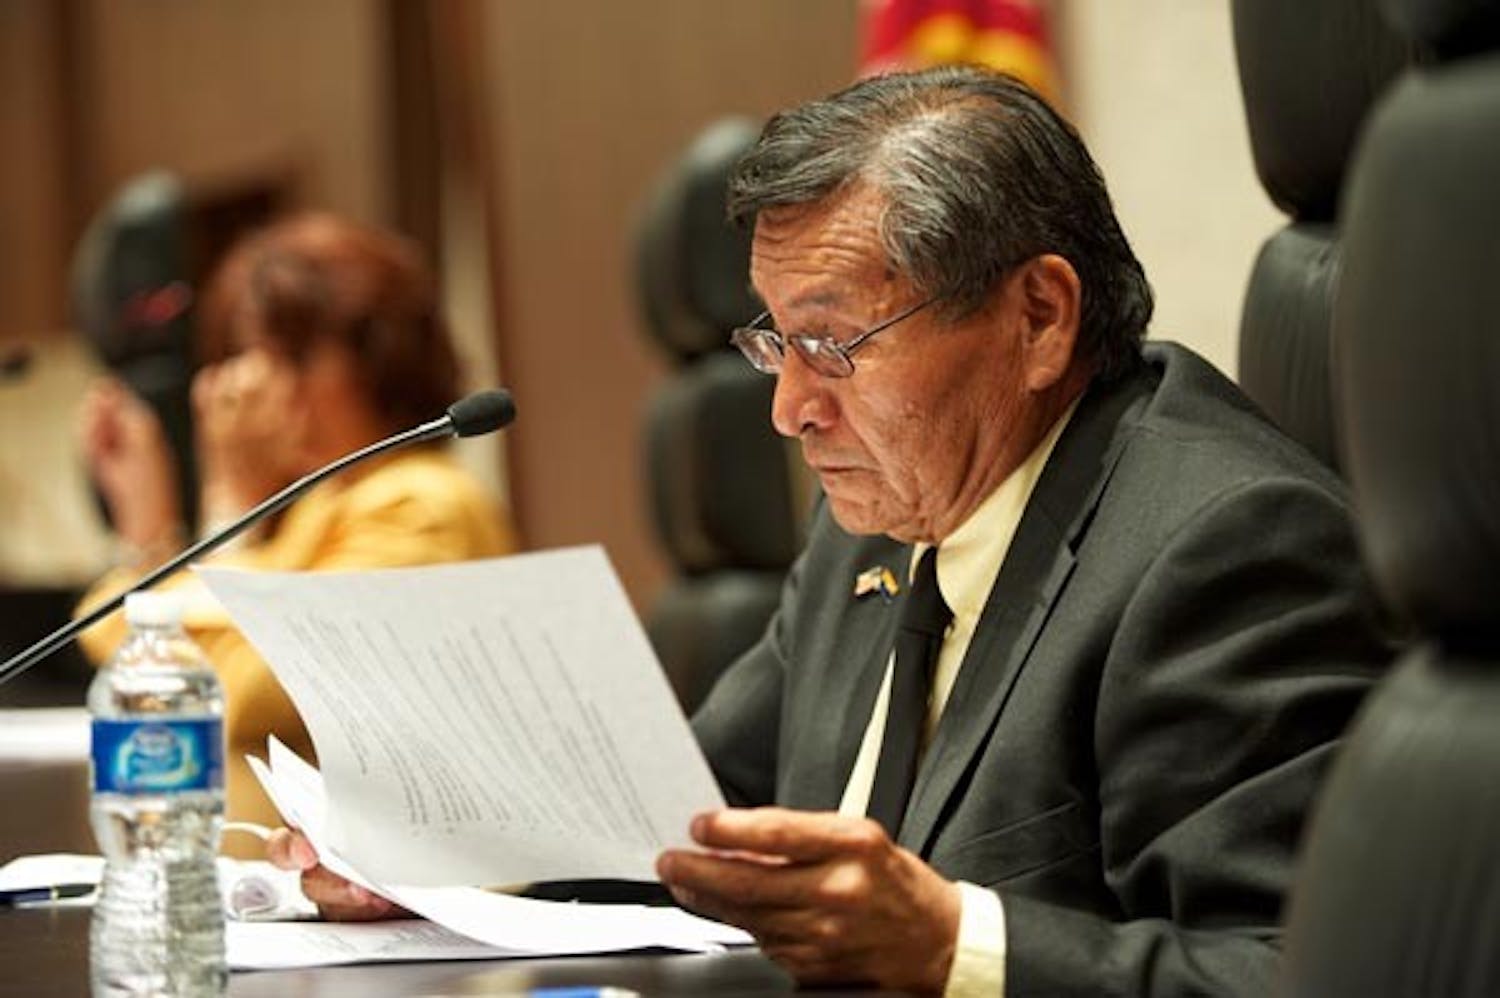 GREAT DEBATE: Navajo Nation Presidential candidate Ben Shelly looks over prepared remarks prior to his debate against Lynda Lovejoy held in Armstrong Hall on the Tempe campus. (Photo by Michael Arellano)